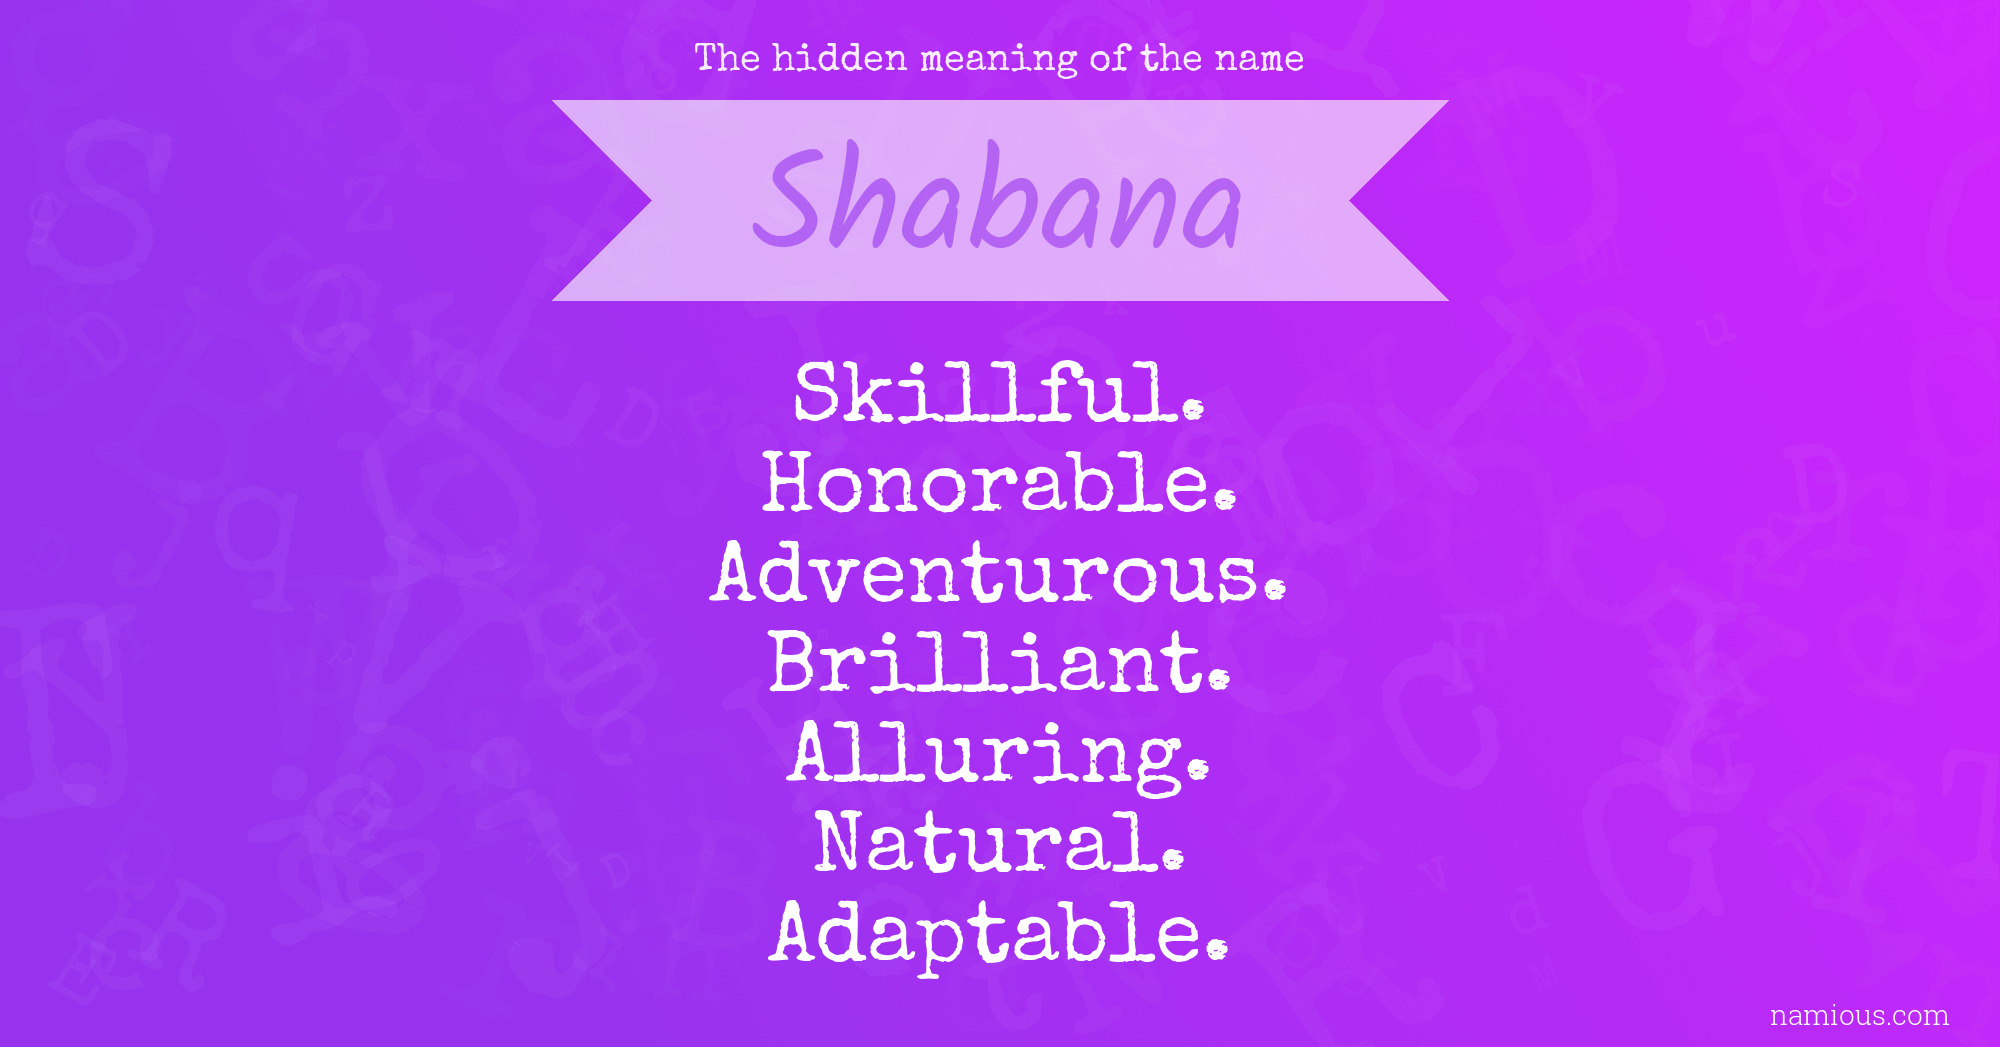 The hidden meaning of the name Shabana